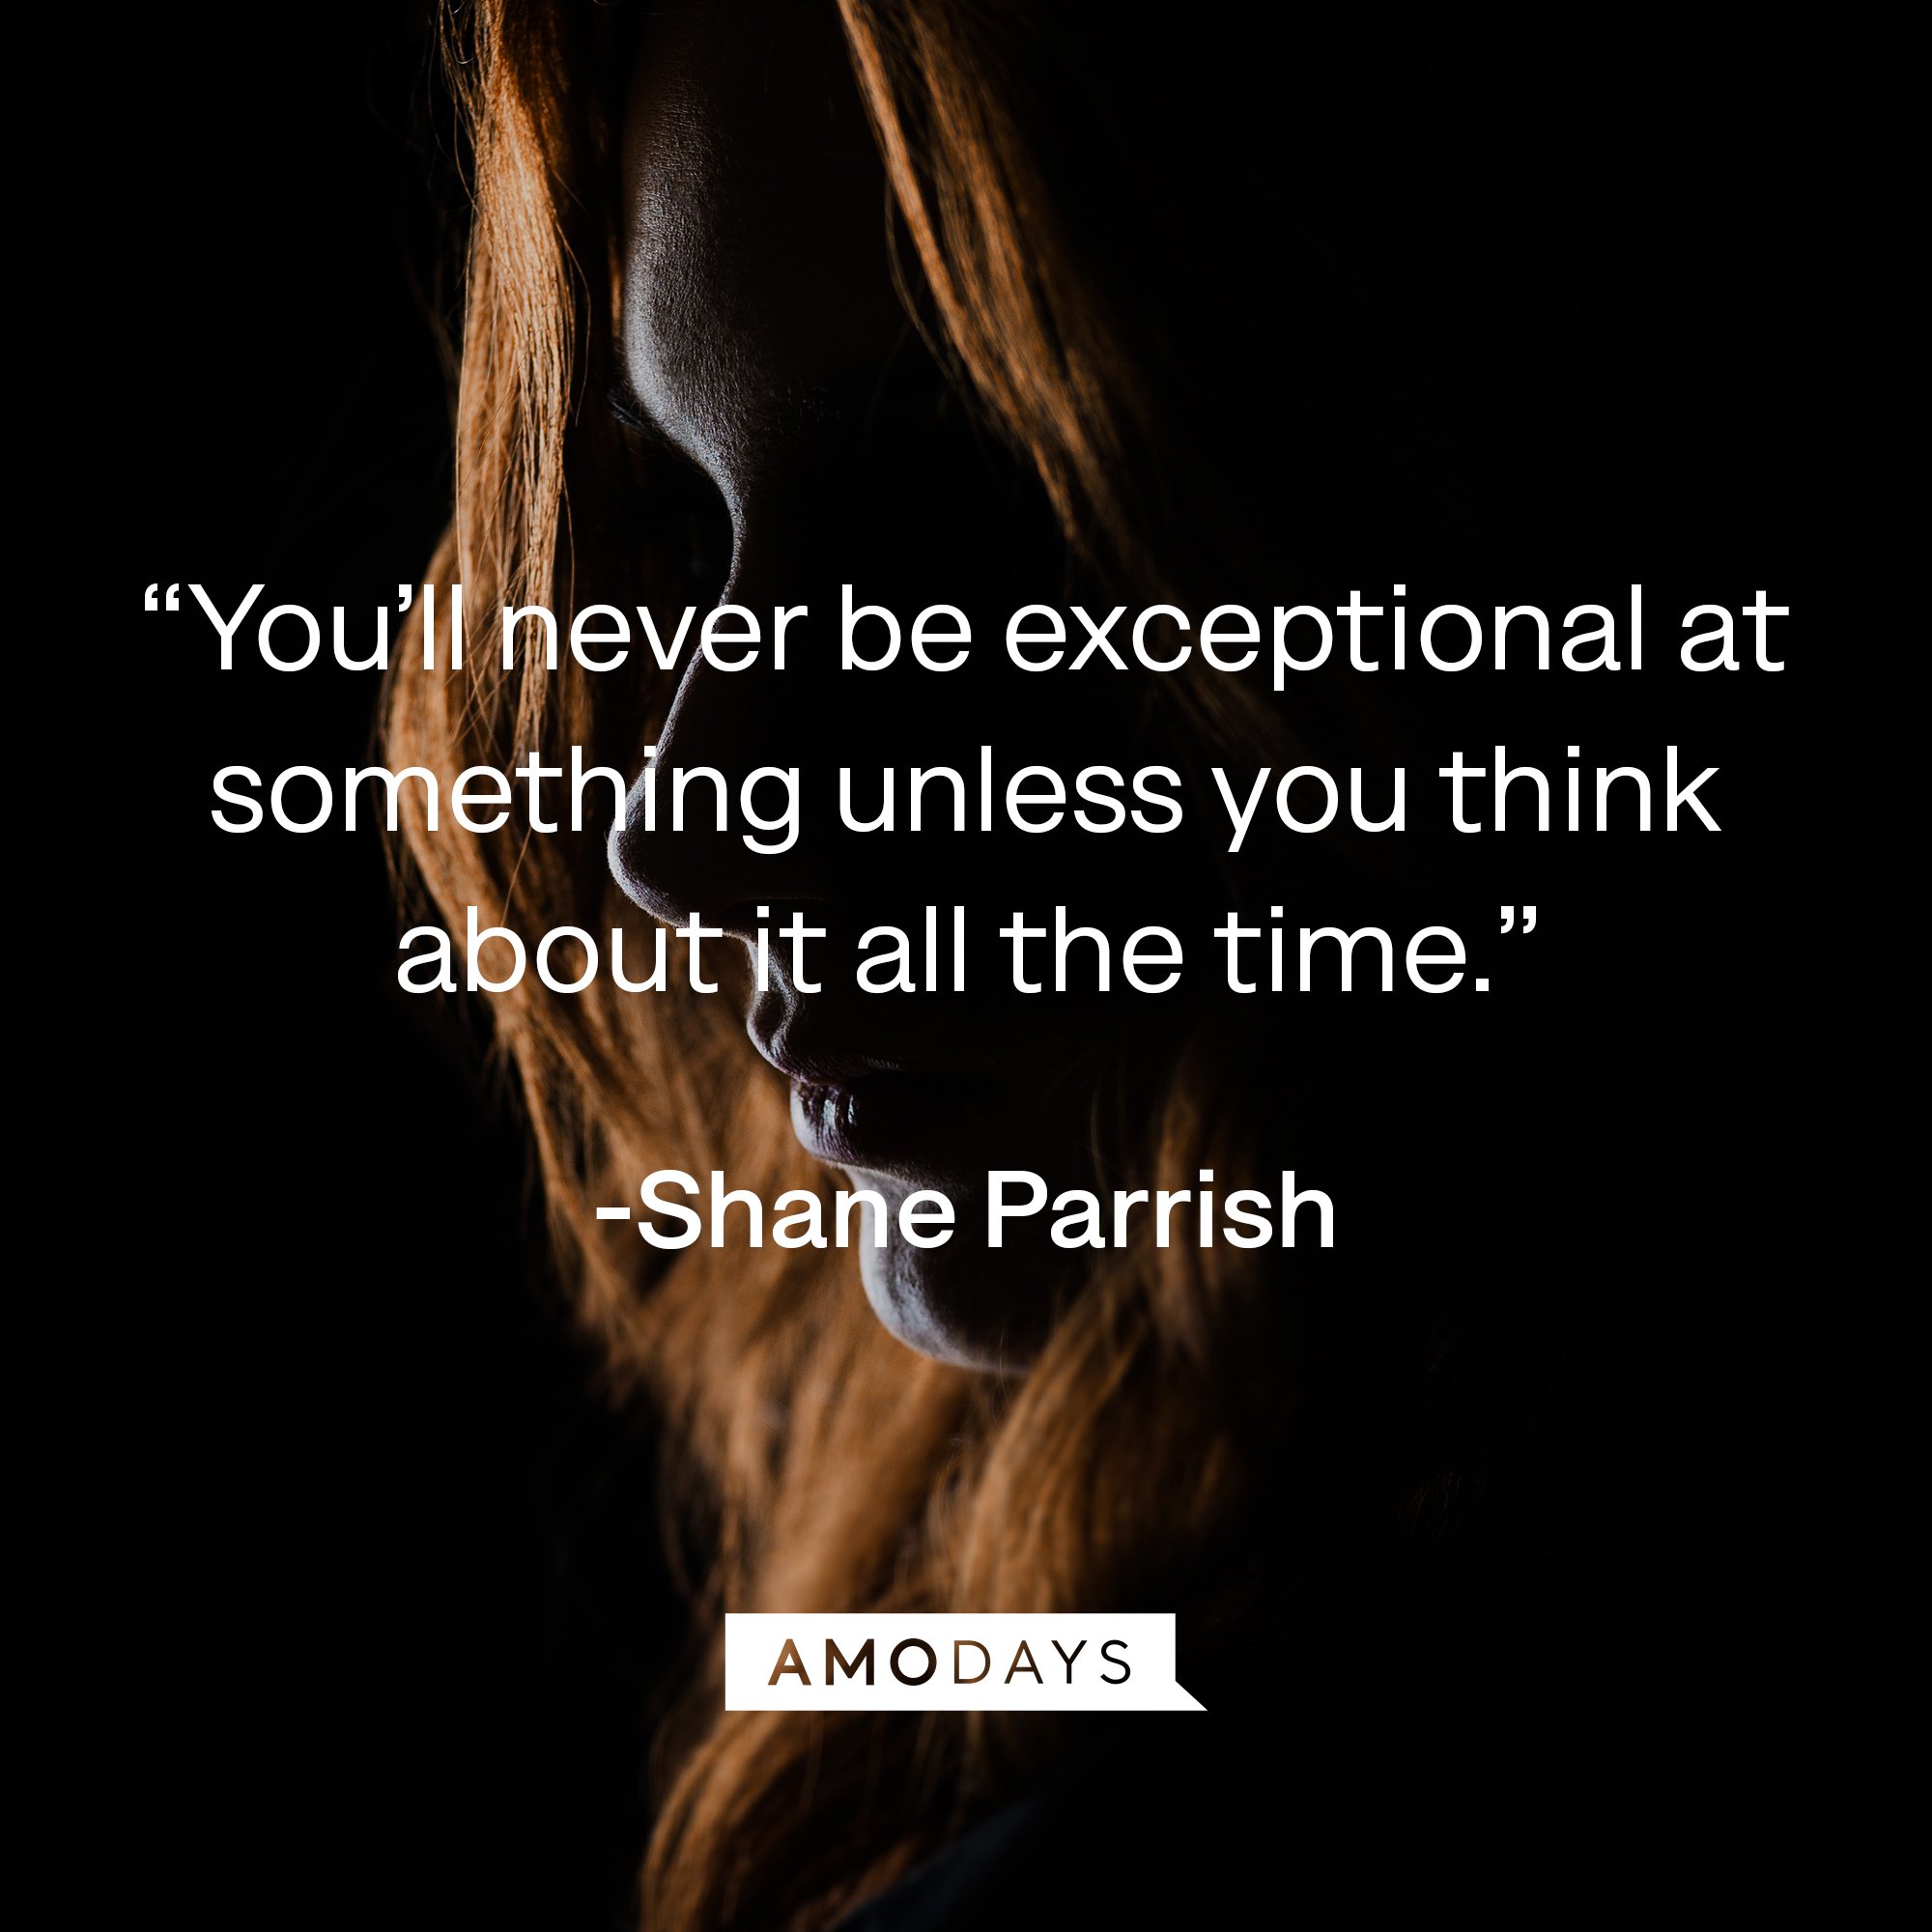  Shane Parrish's quote: “You’ll never be exceptional at something unless you think about it all the time.” | Image: AmoDays